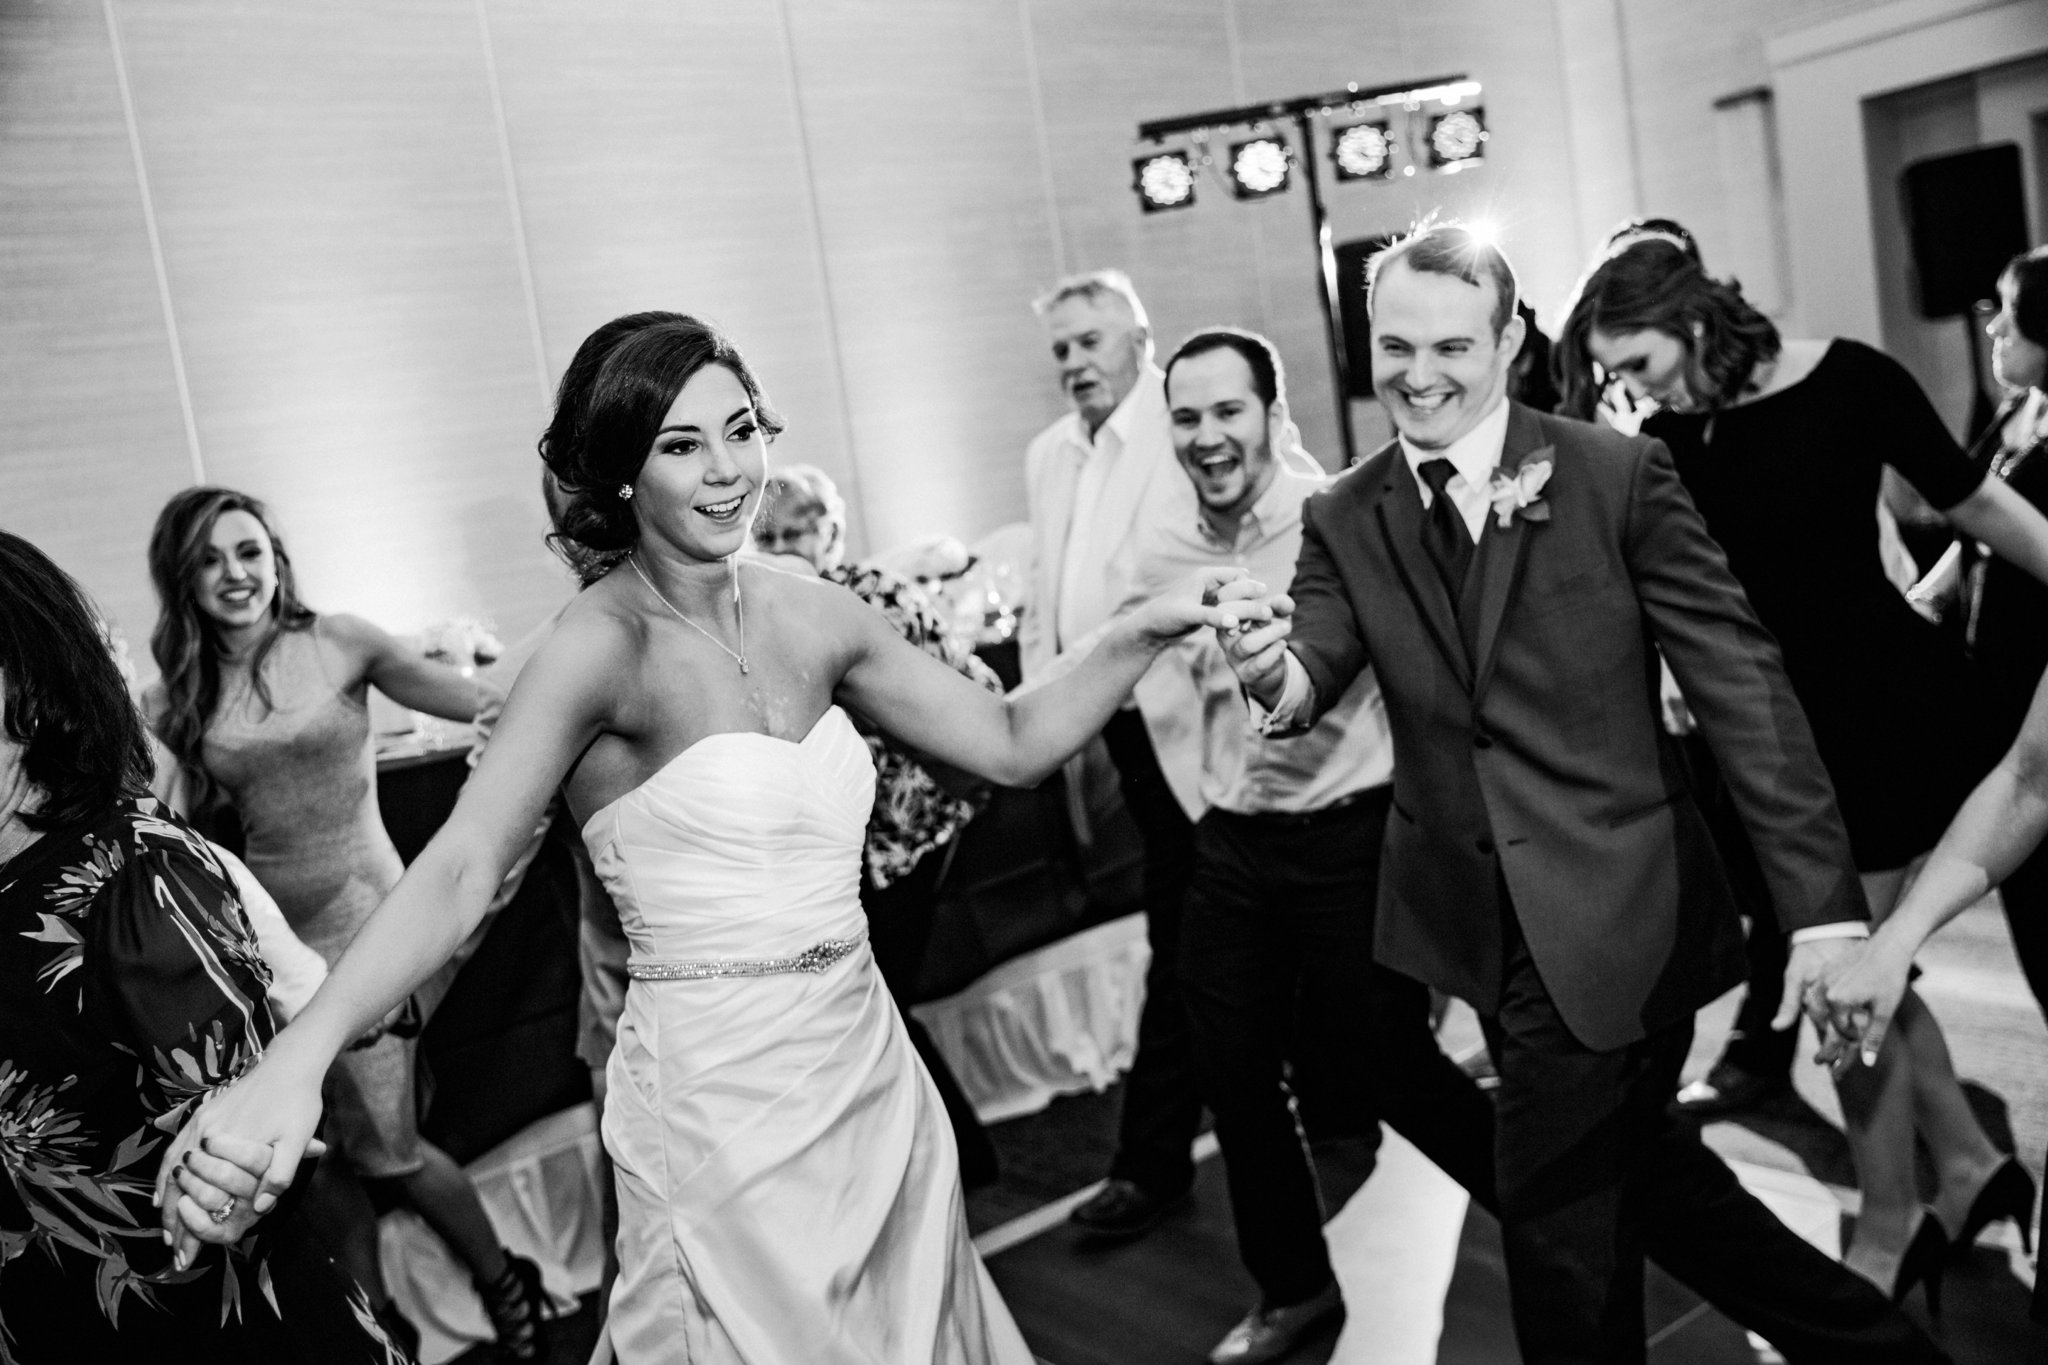 black and white | wedding | wedding photos | wedding photography | images by feliciathephotographer.com | Country Club Plaza | Kansas City | The Marriott | Unity Temple | reception venue | reception activities | dance floor | candid | guests dancing | Jukeboxx Media | dancing bride | spot lights | smiling groom 